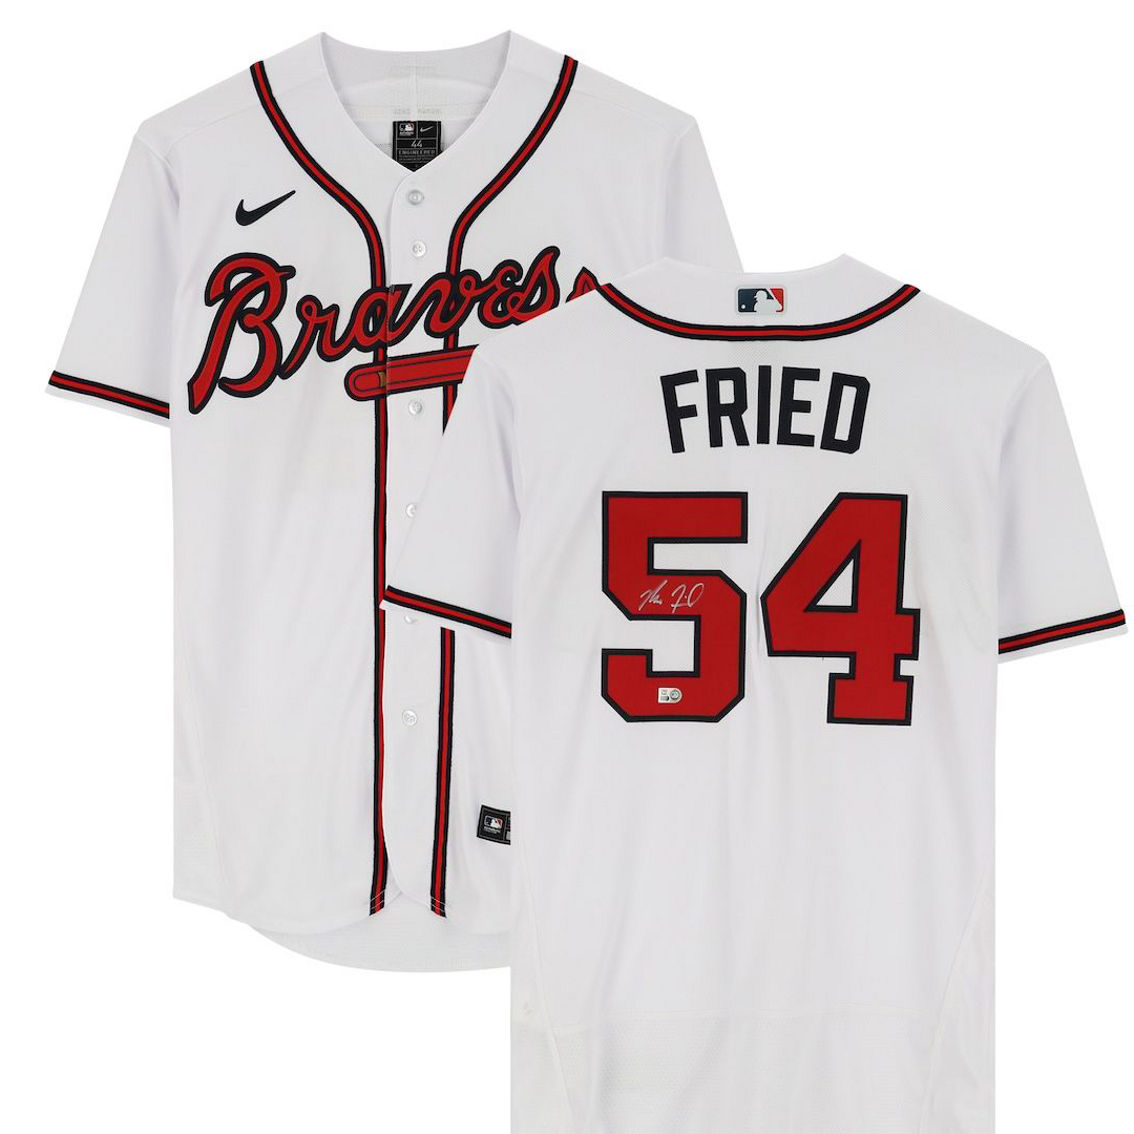 Fanatics Authentic Max Fried Atlanta Braves Autographed White Authentic Jersey - Image 2 of 4